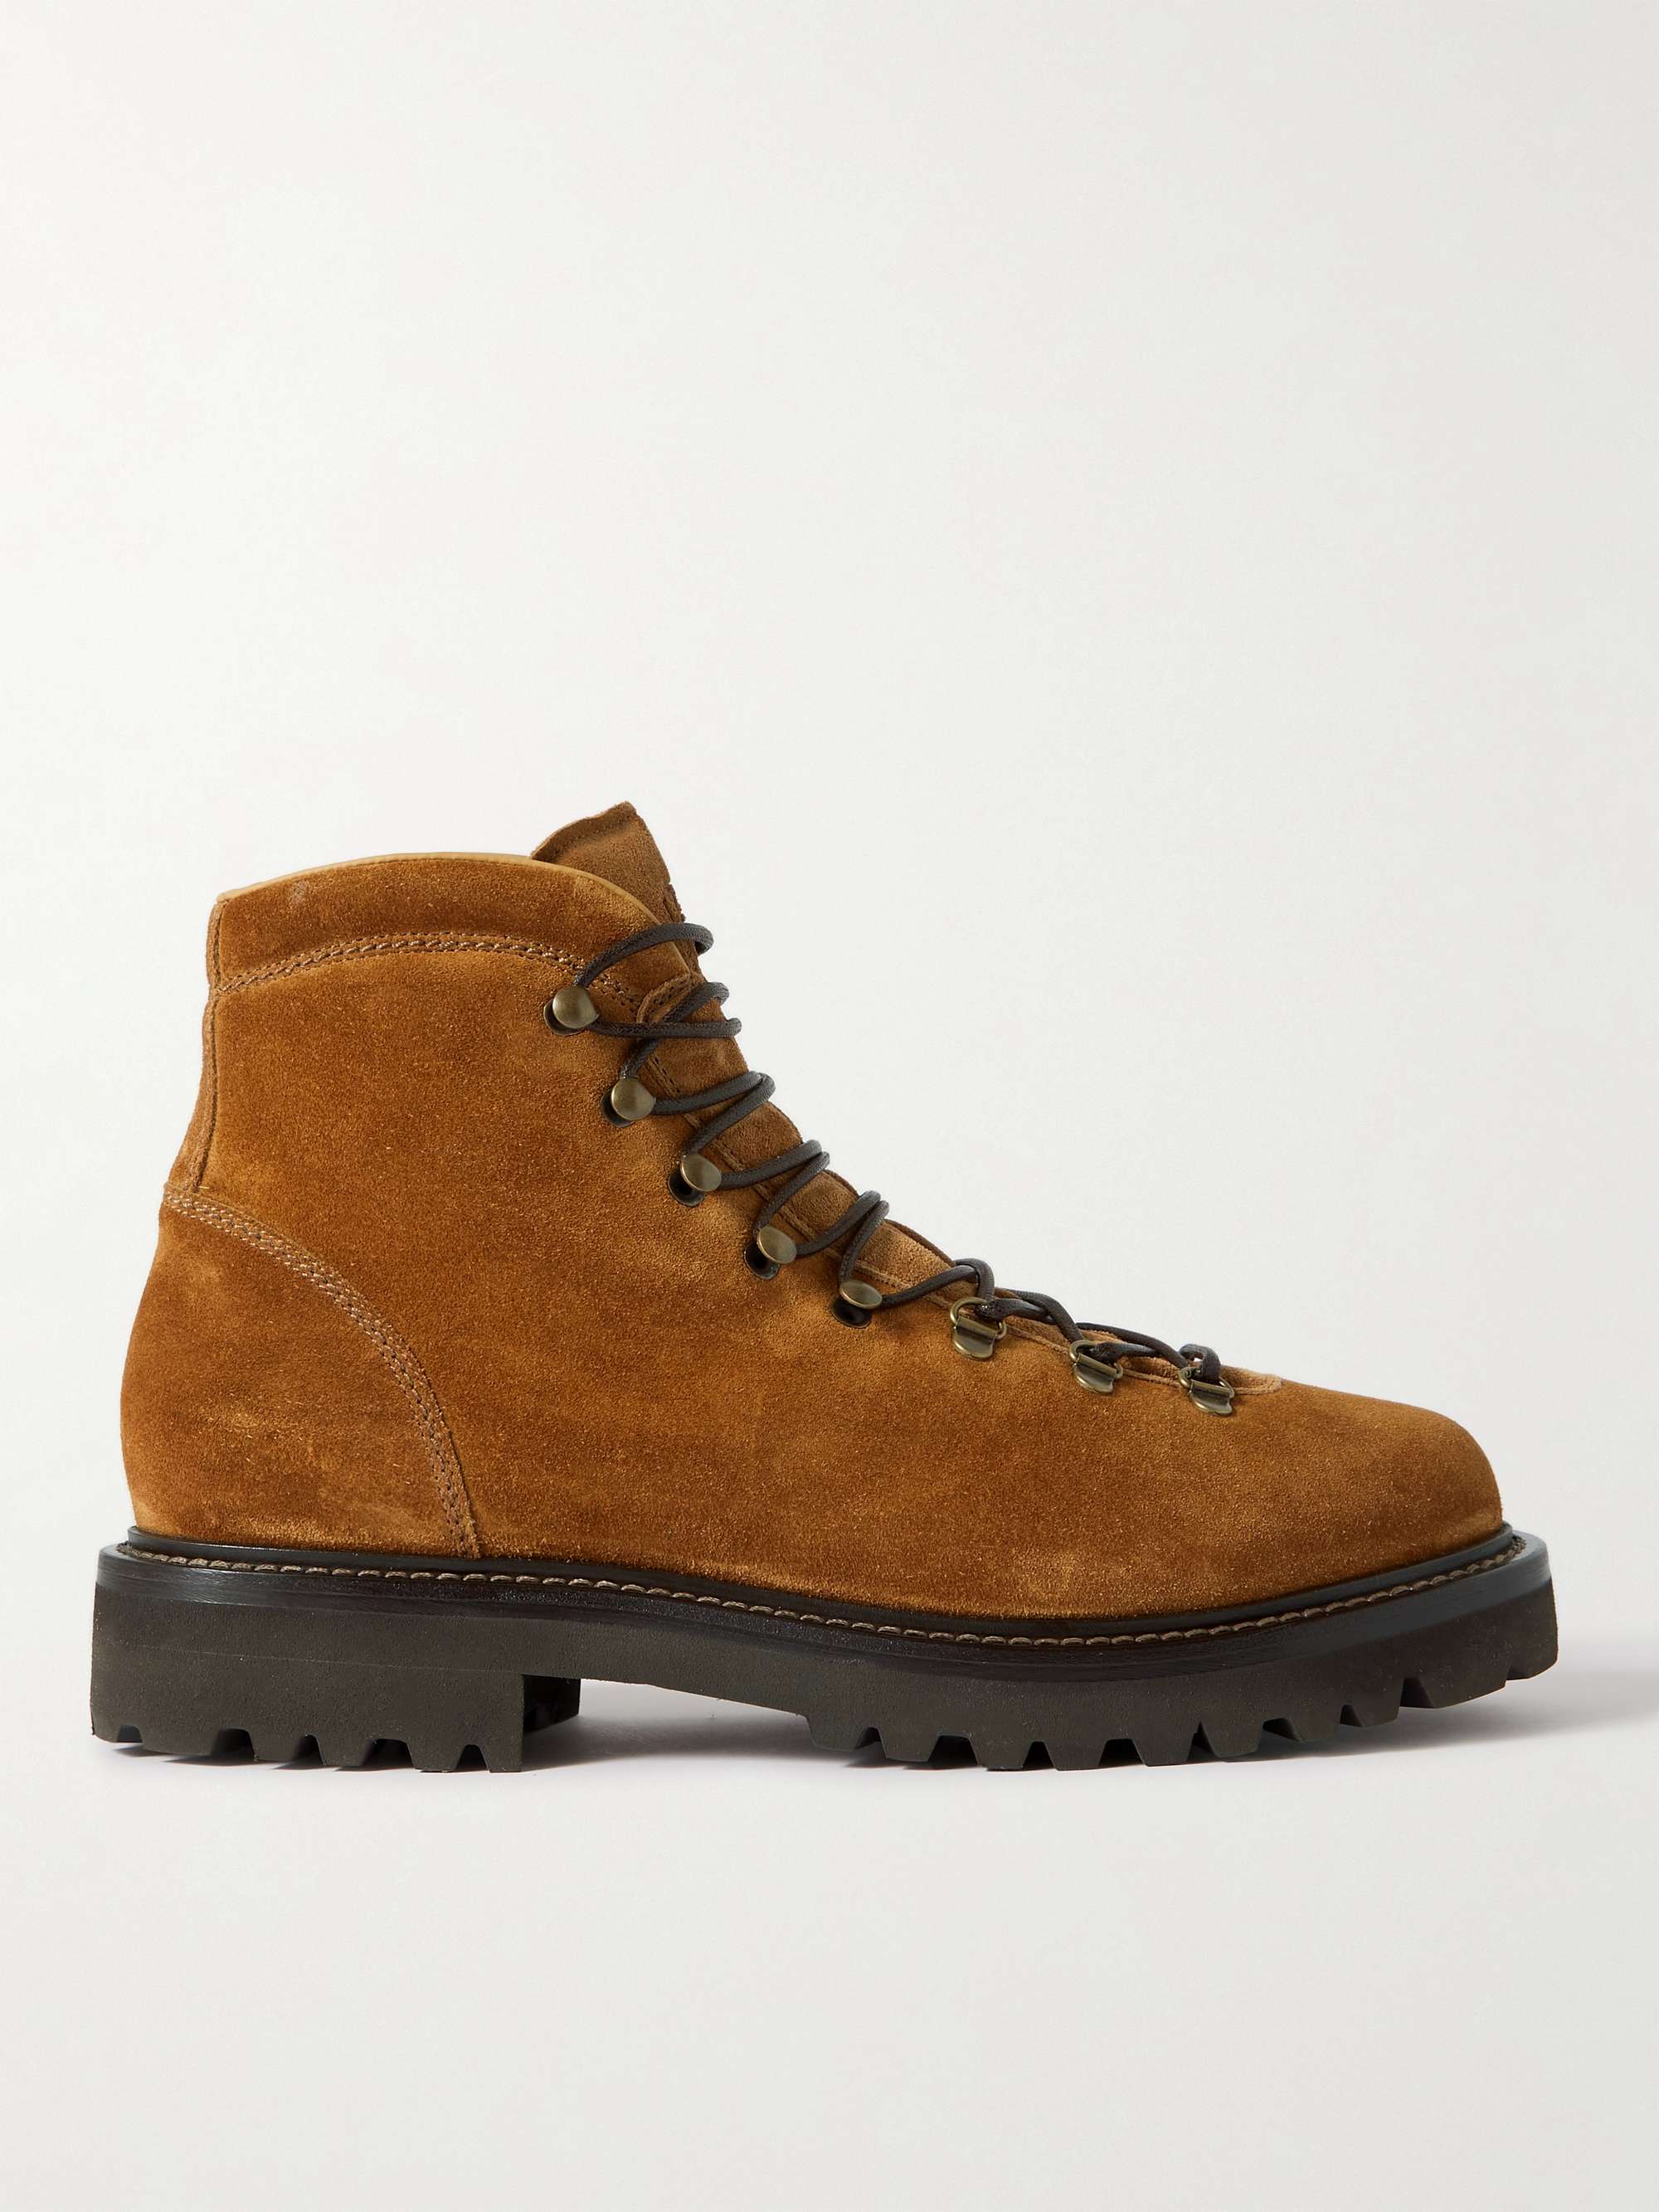 BRUNELLO CUCINELLI Shearling-Lined Suede Hiking Boots for Men | MR PORTER